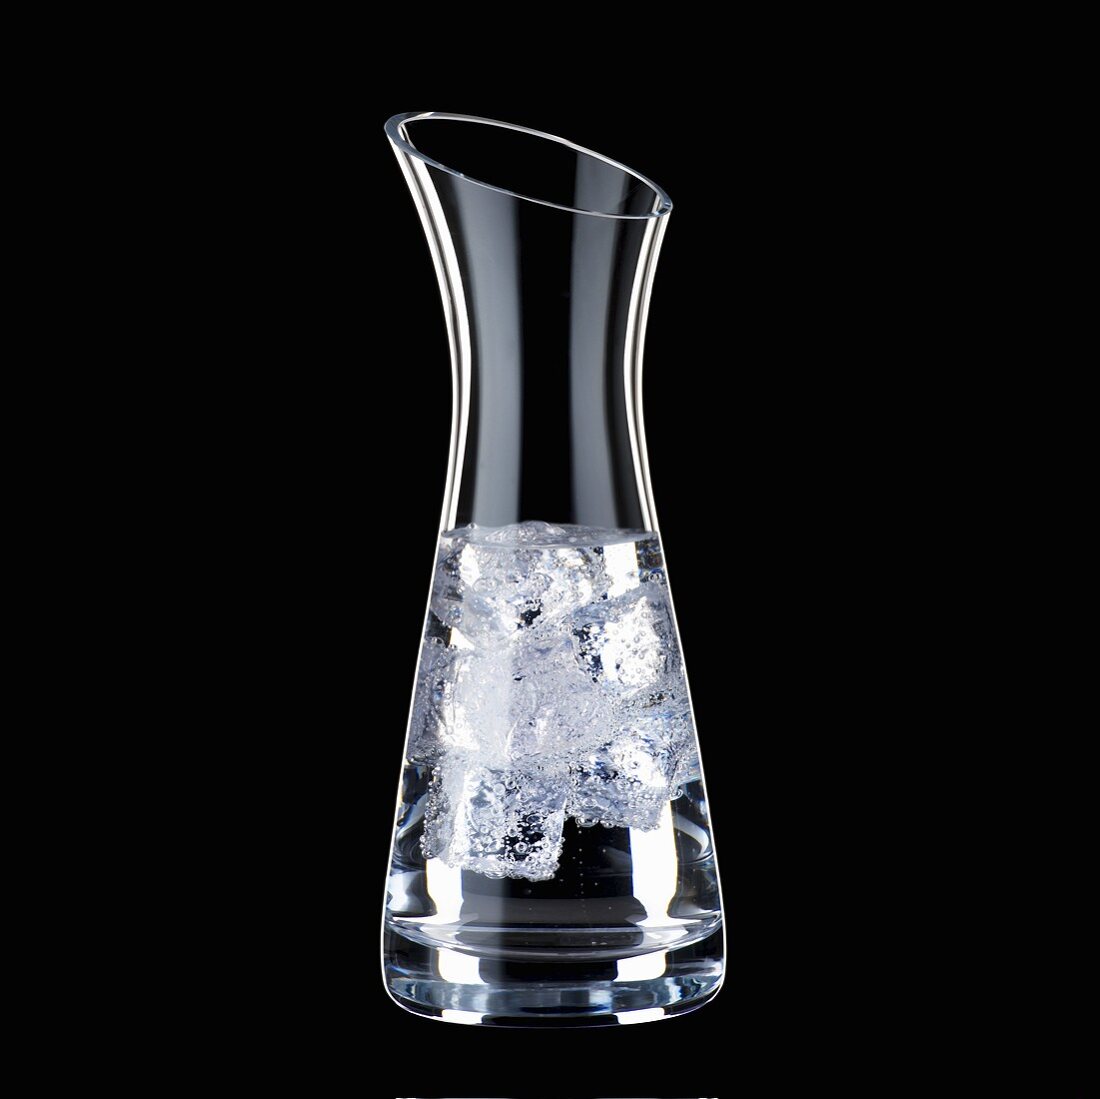 Water with ice cubes in carafe